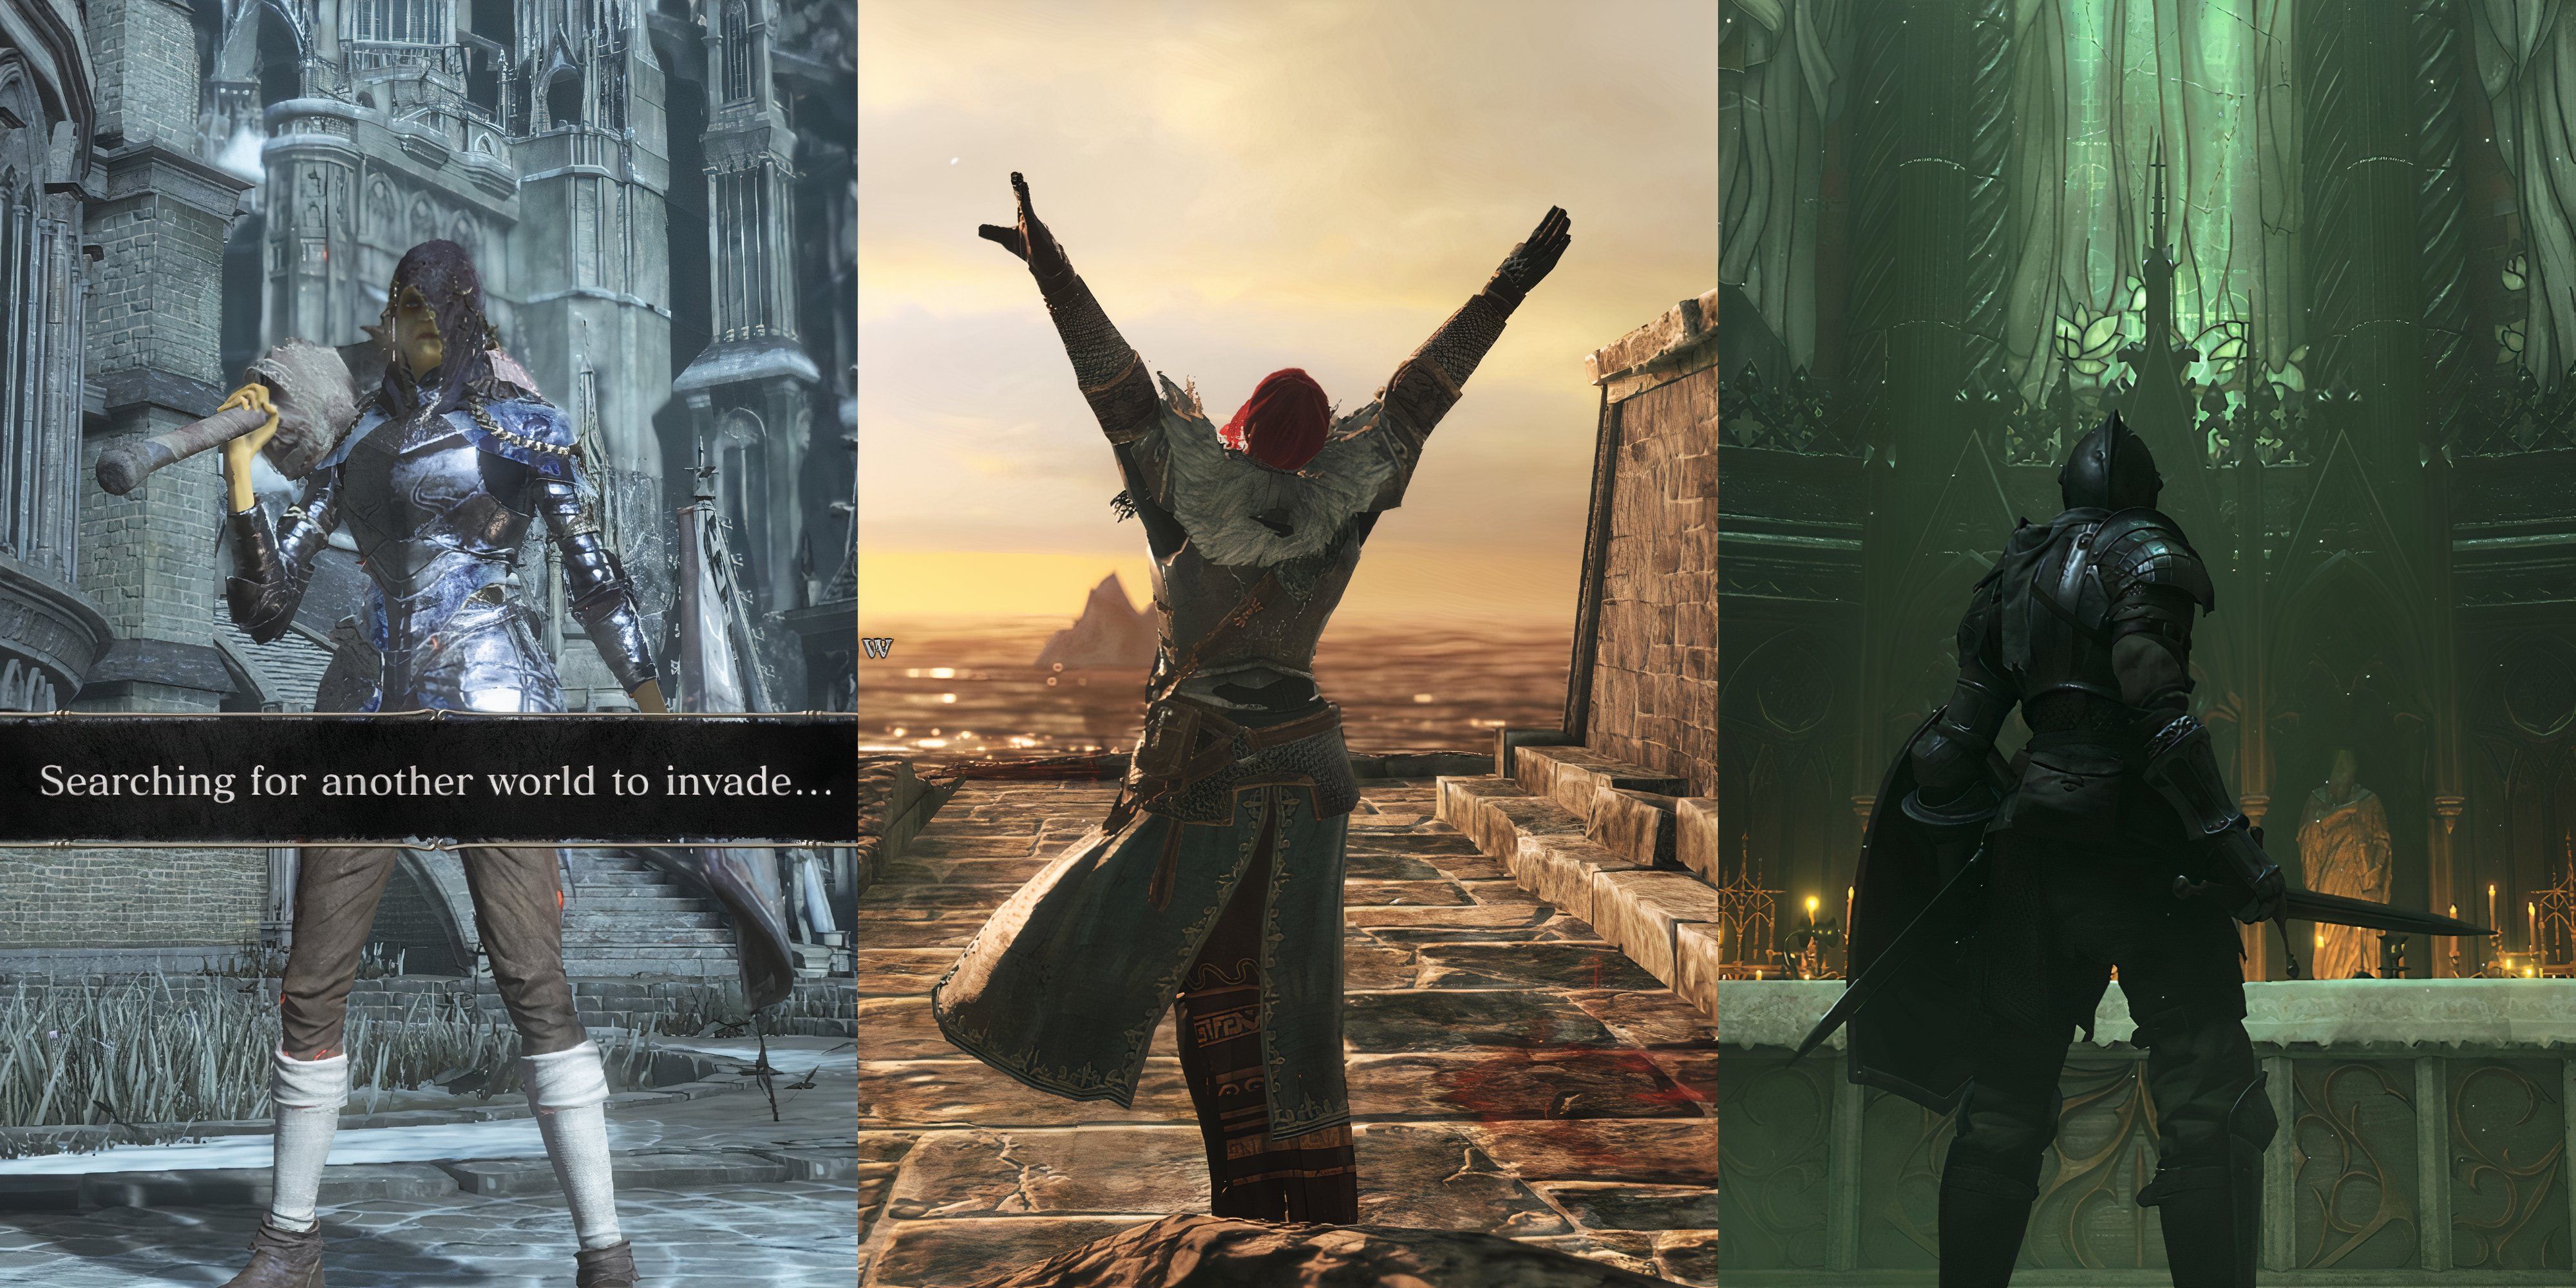 Best SoulsBorneGames For PvP, Ranked Three characters from Souls Games